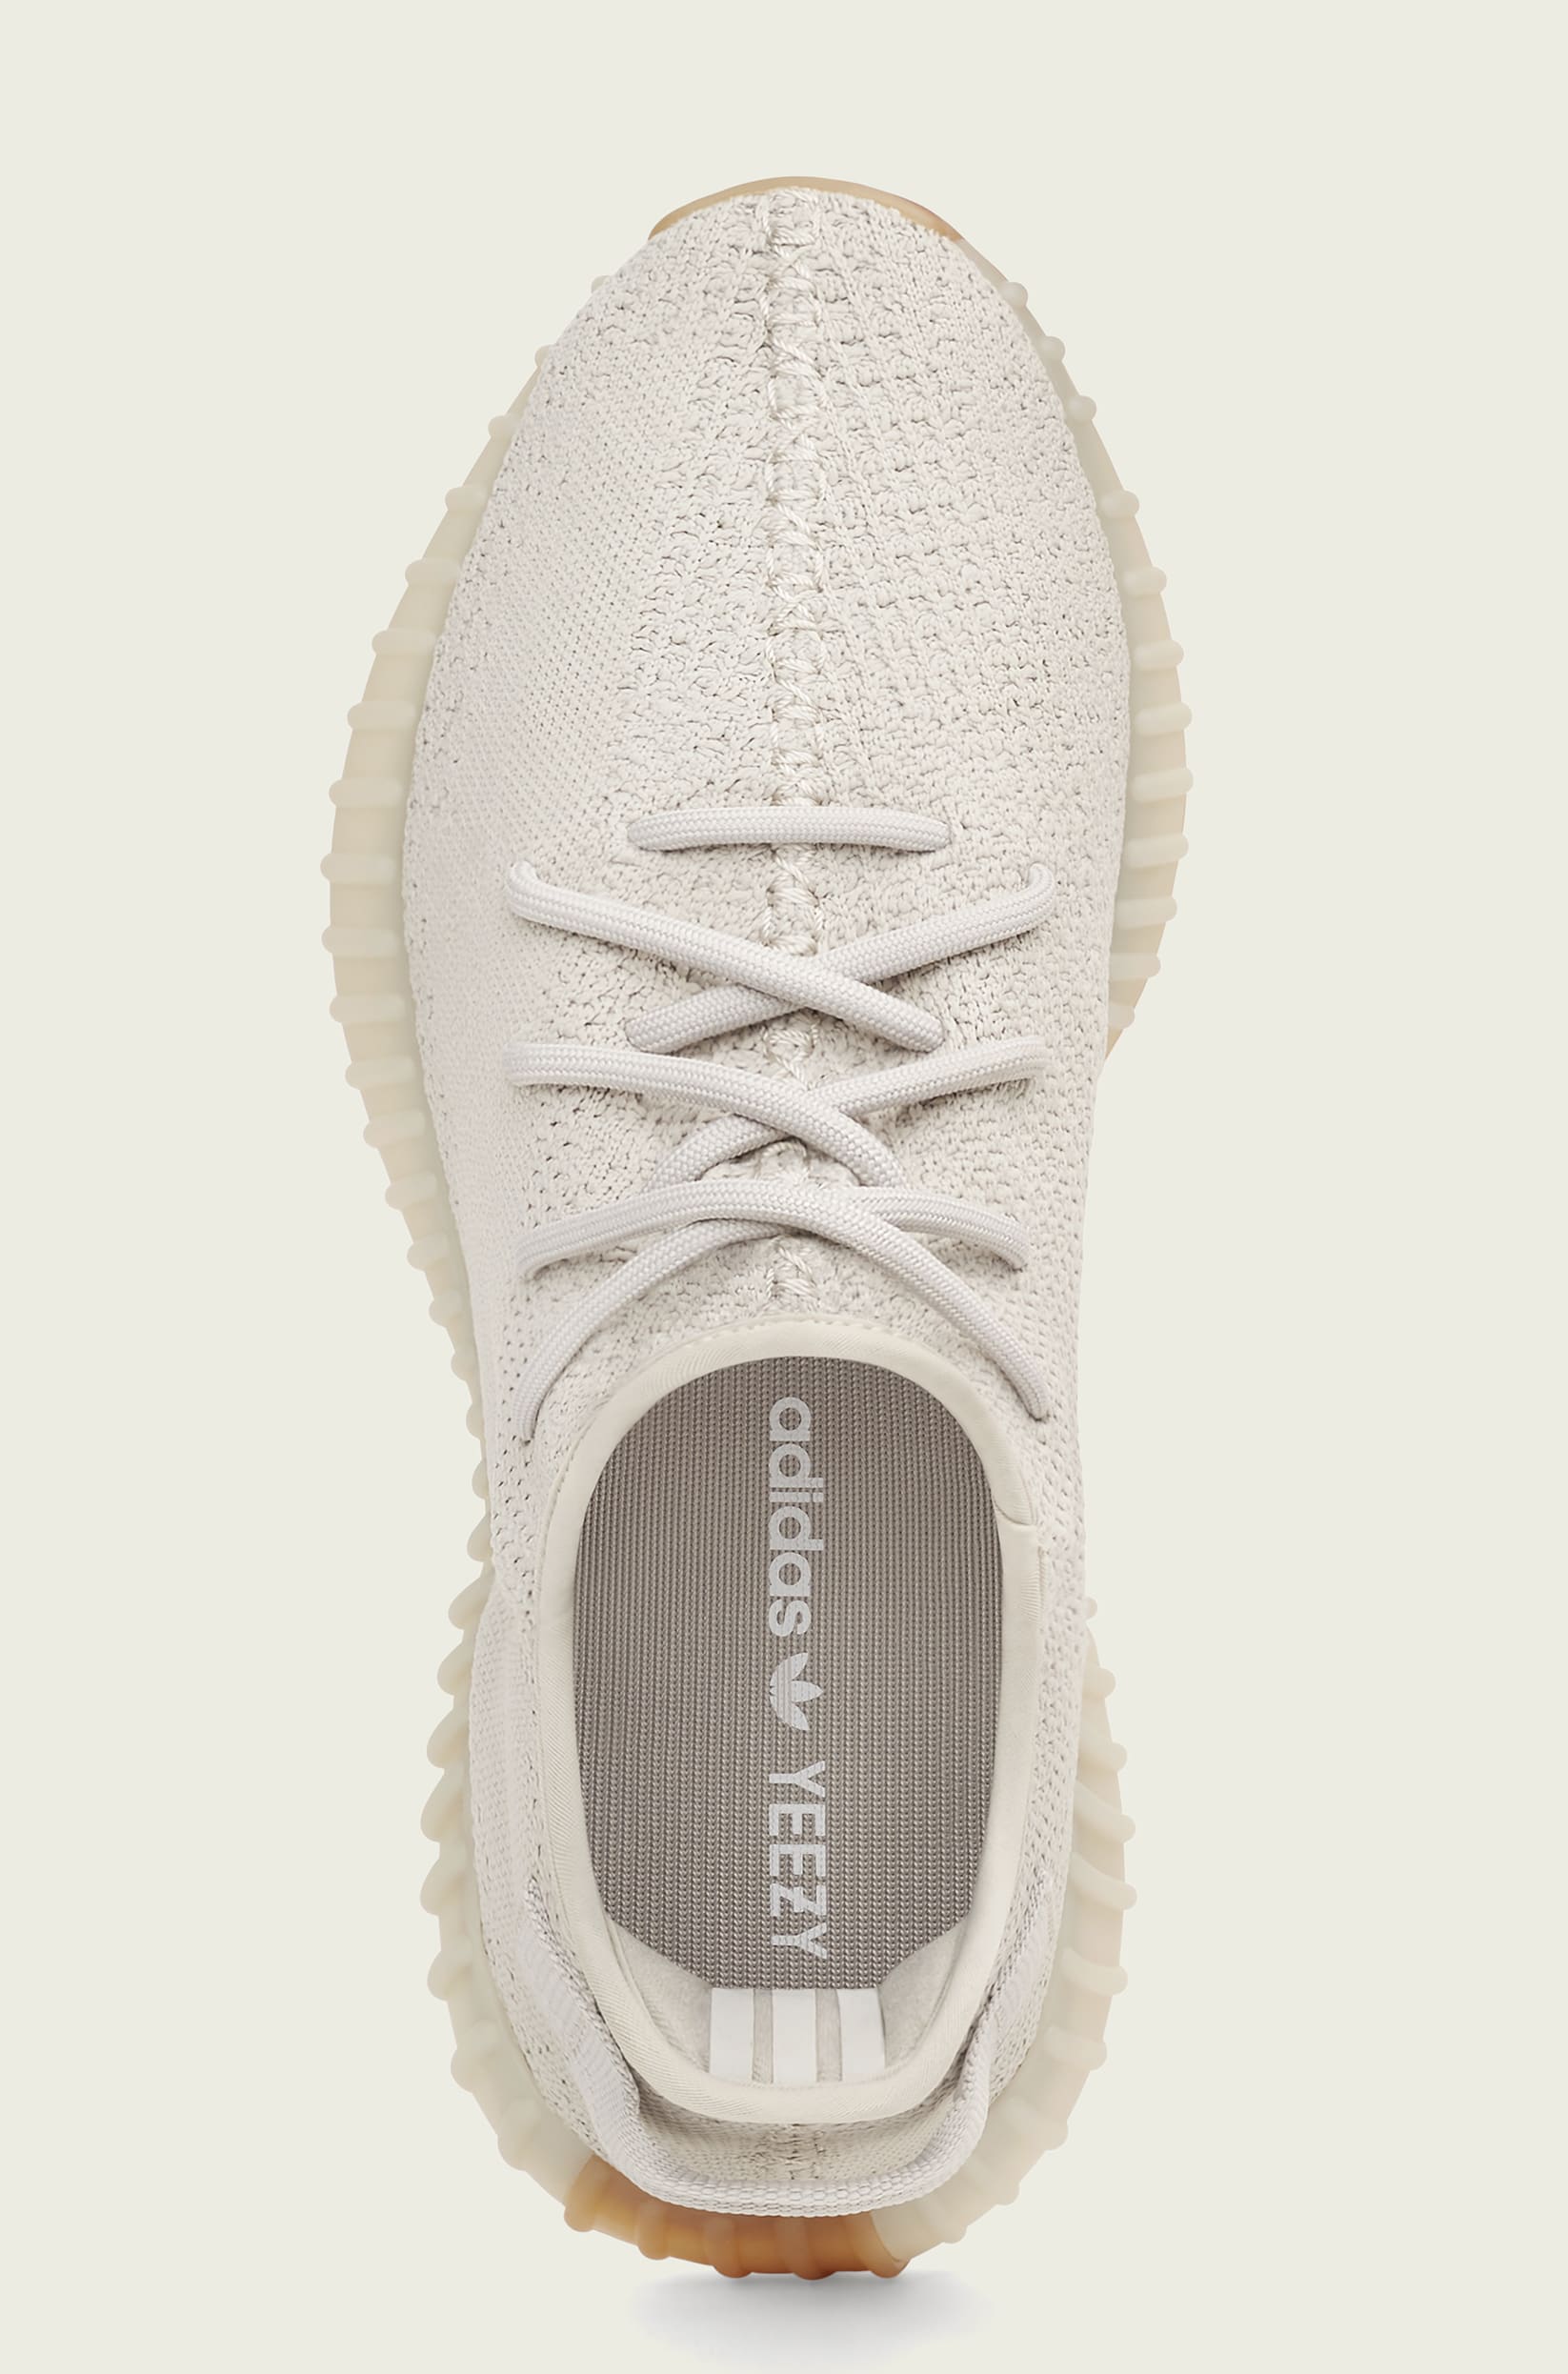 yeezy boost 350 v2 sesame resell price